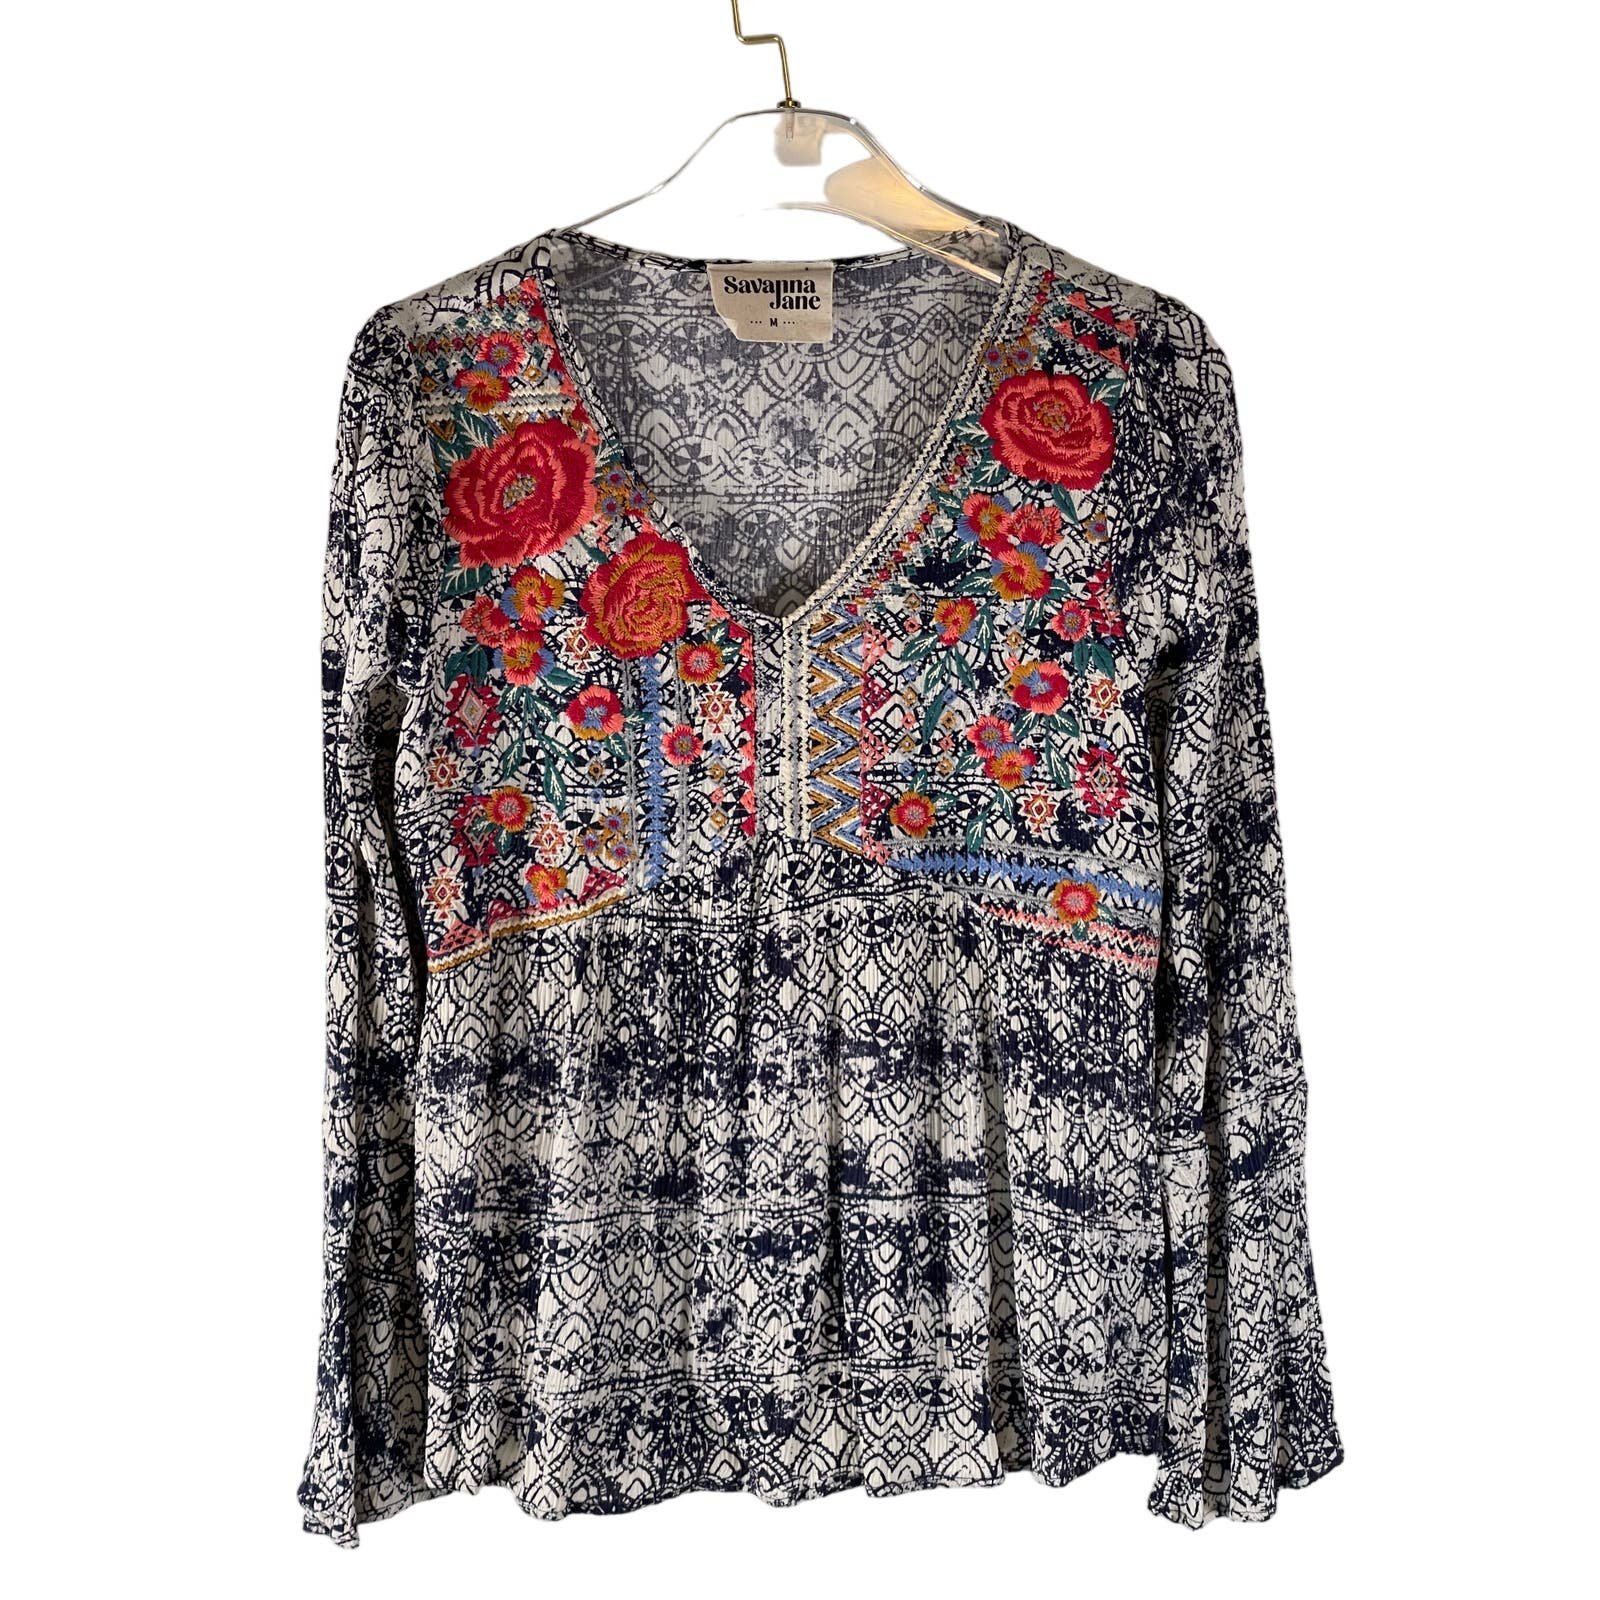 Stylish Savannah Jane Floral Embroidered Blouse With Be